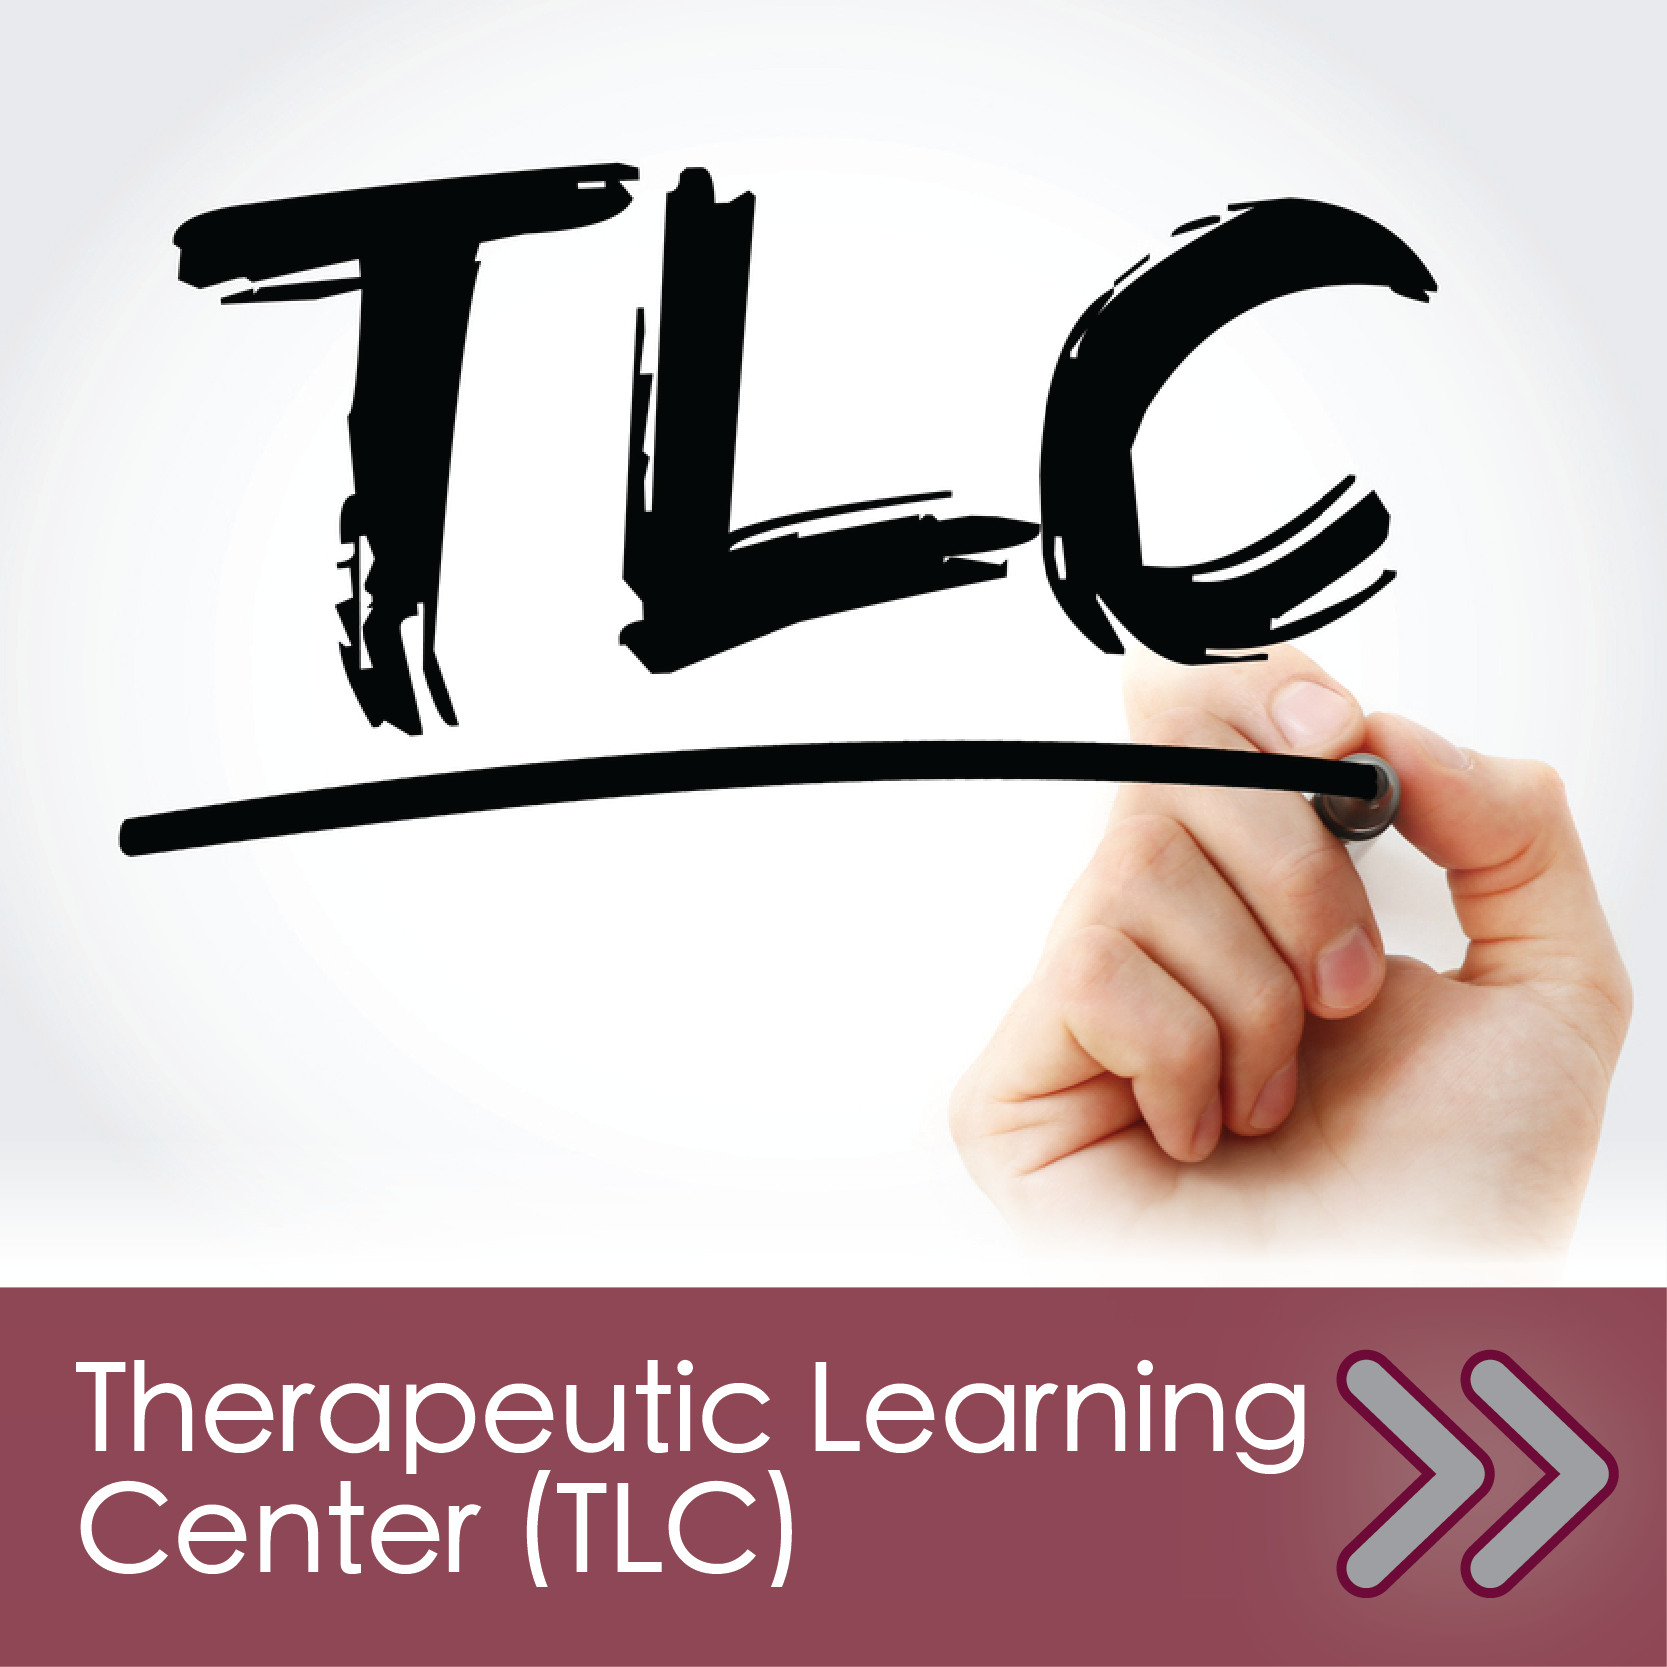 Therapeutic Learning Center (TLC)